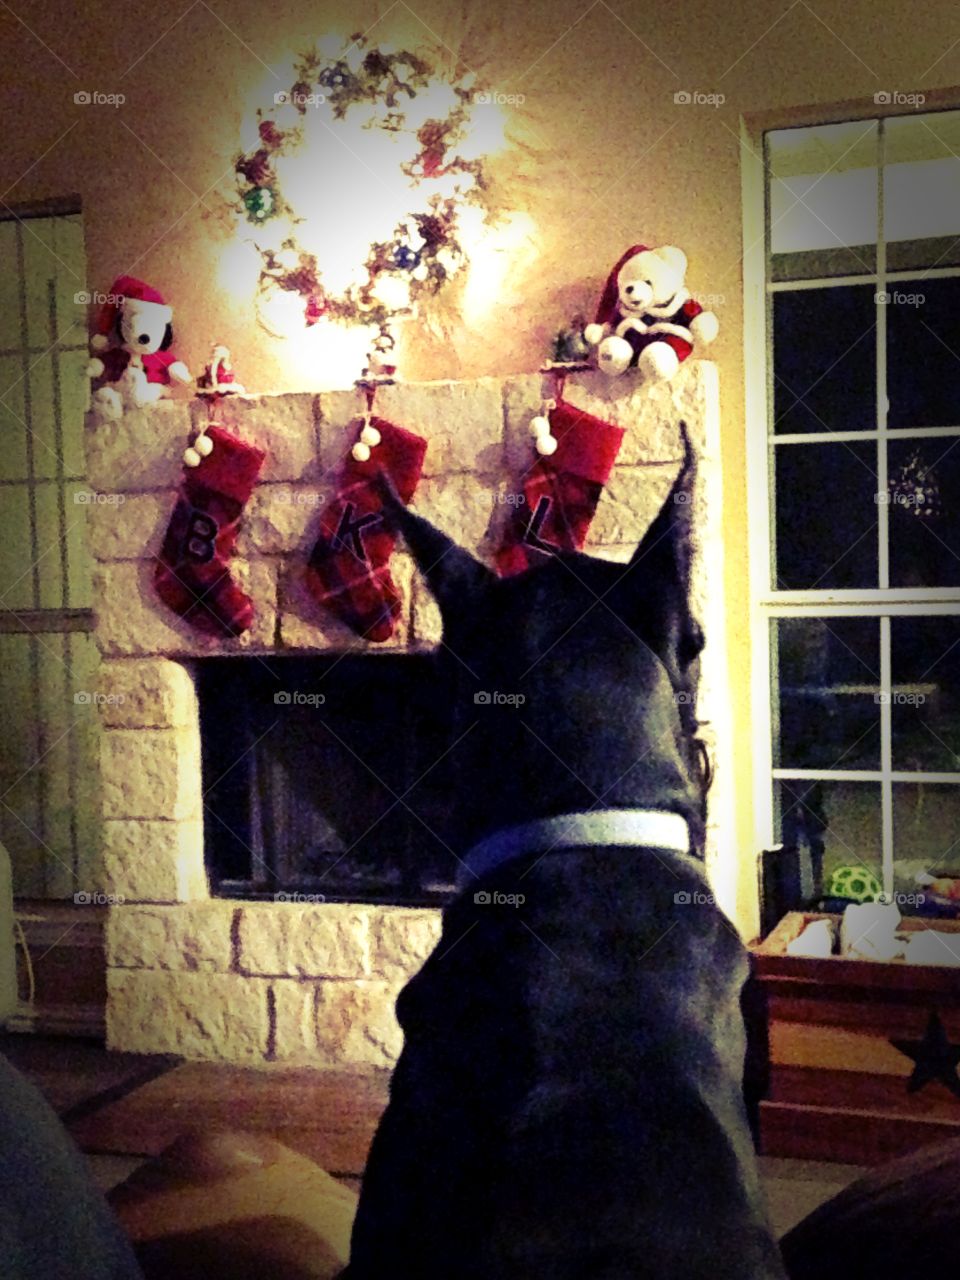 Jasper, my Great Dane, looking at the lights.